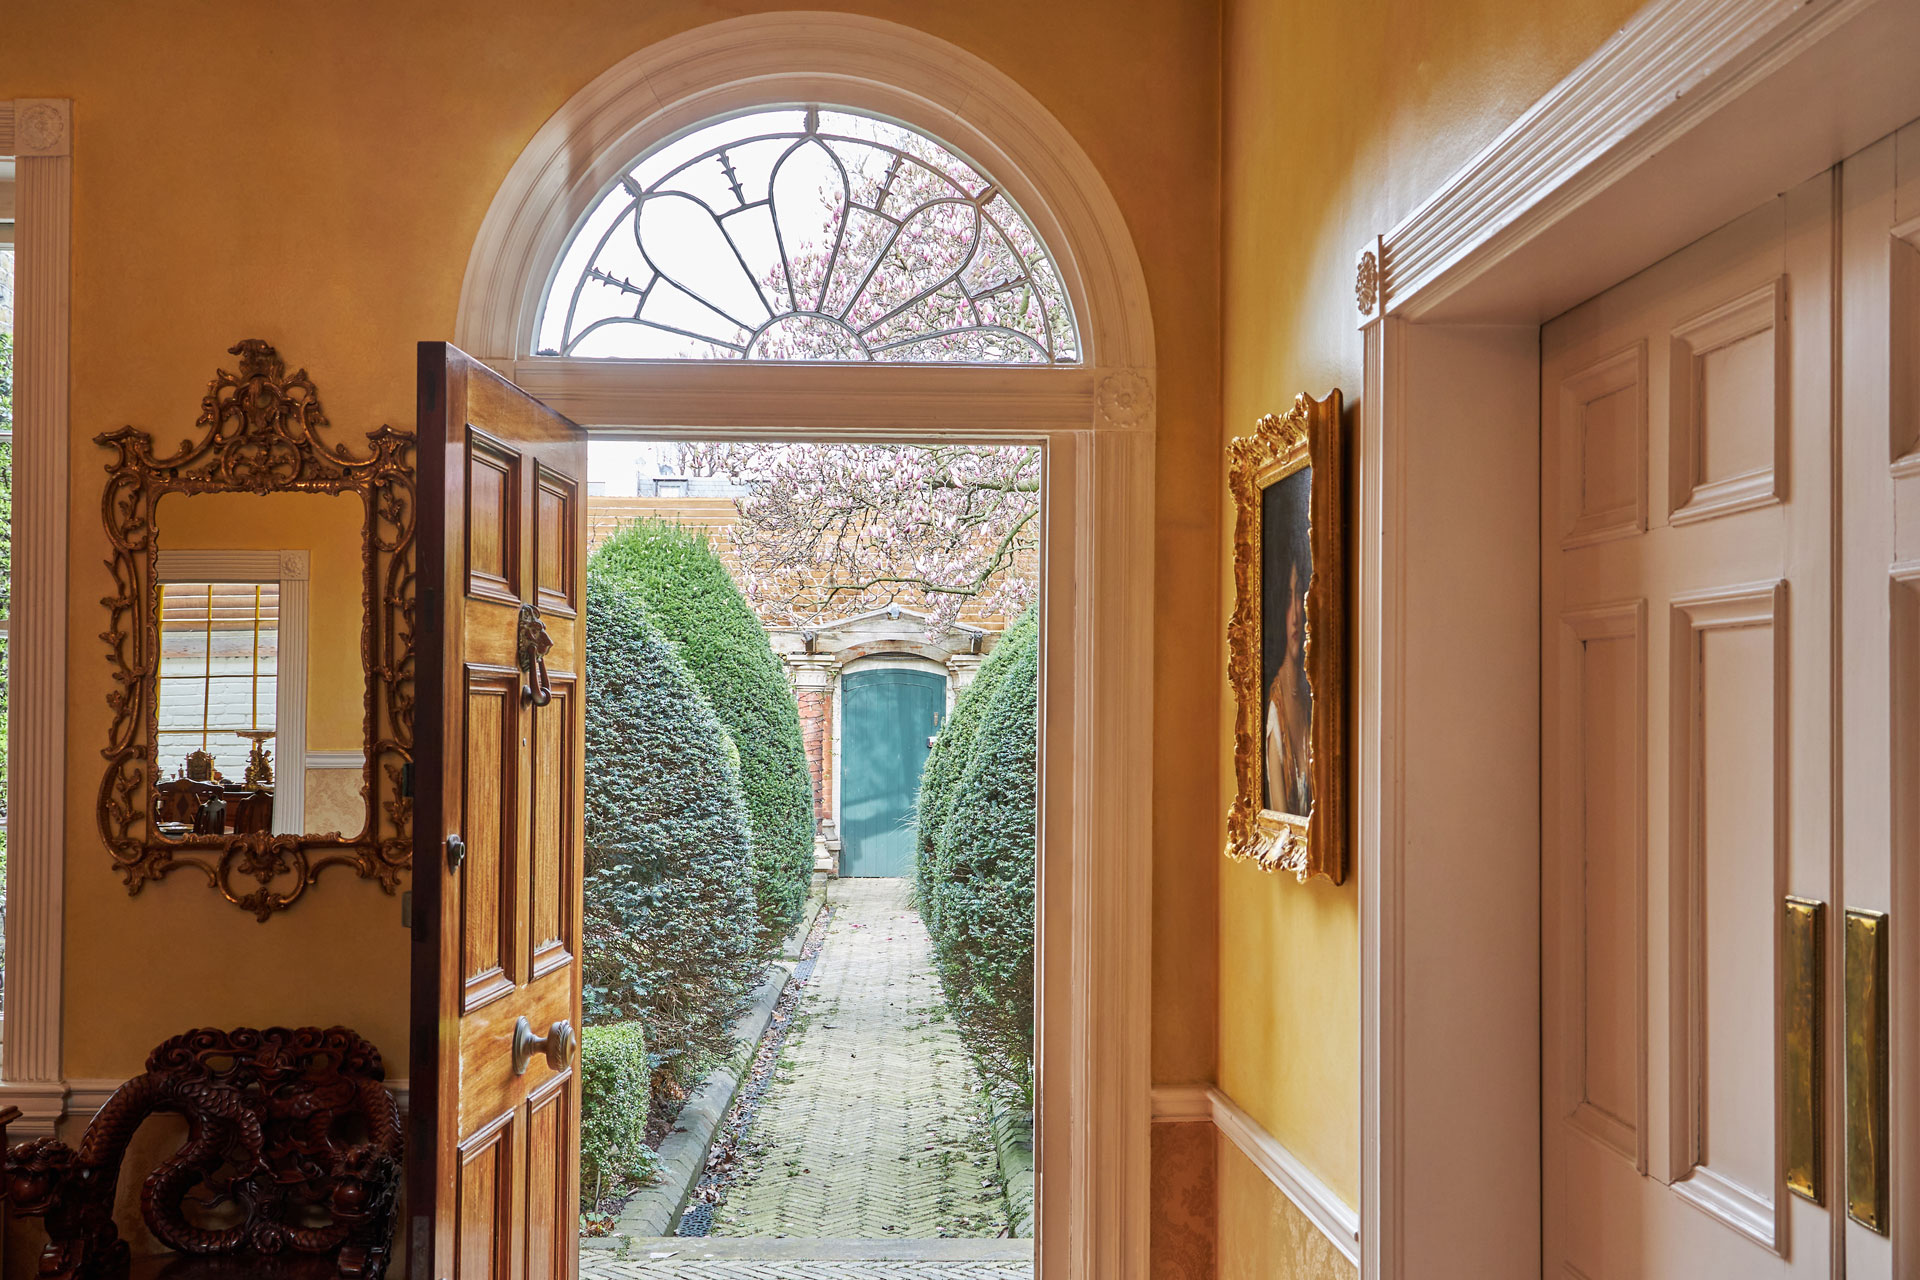 Hallway with arched glass window above the doorway.